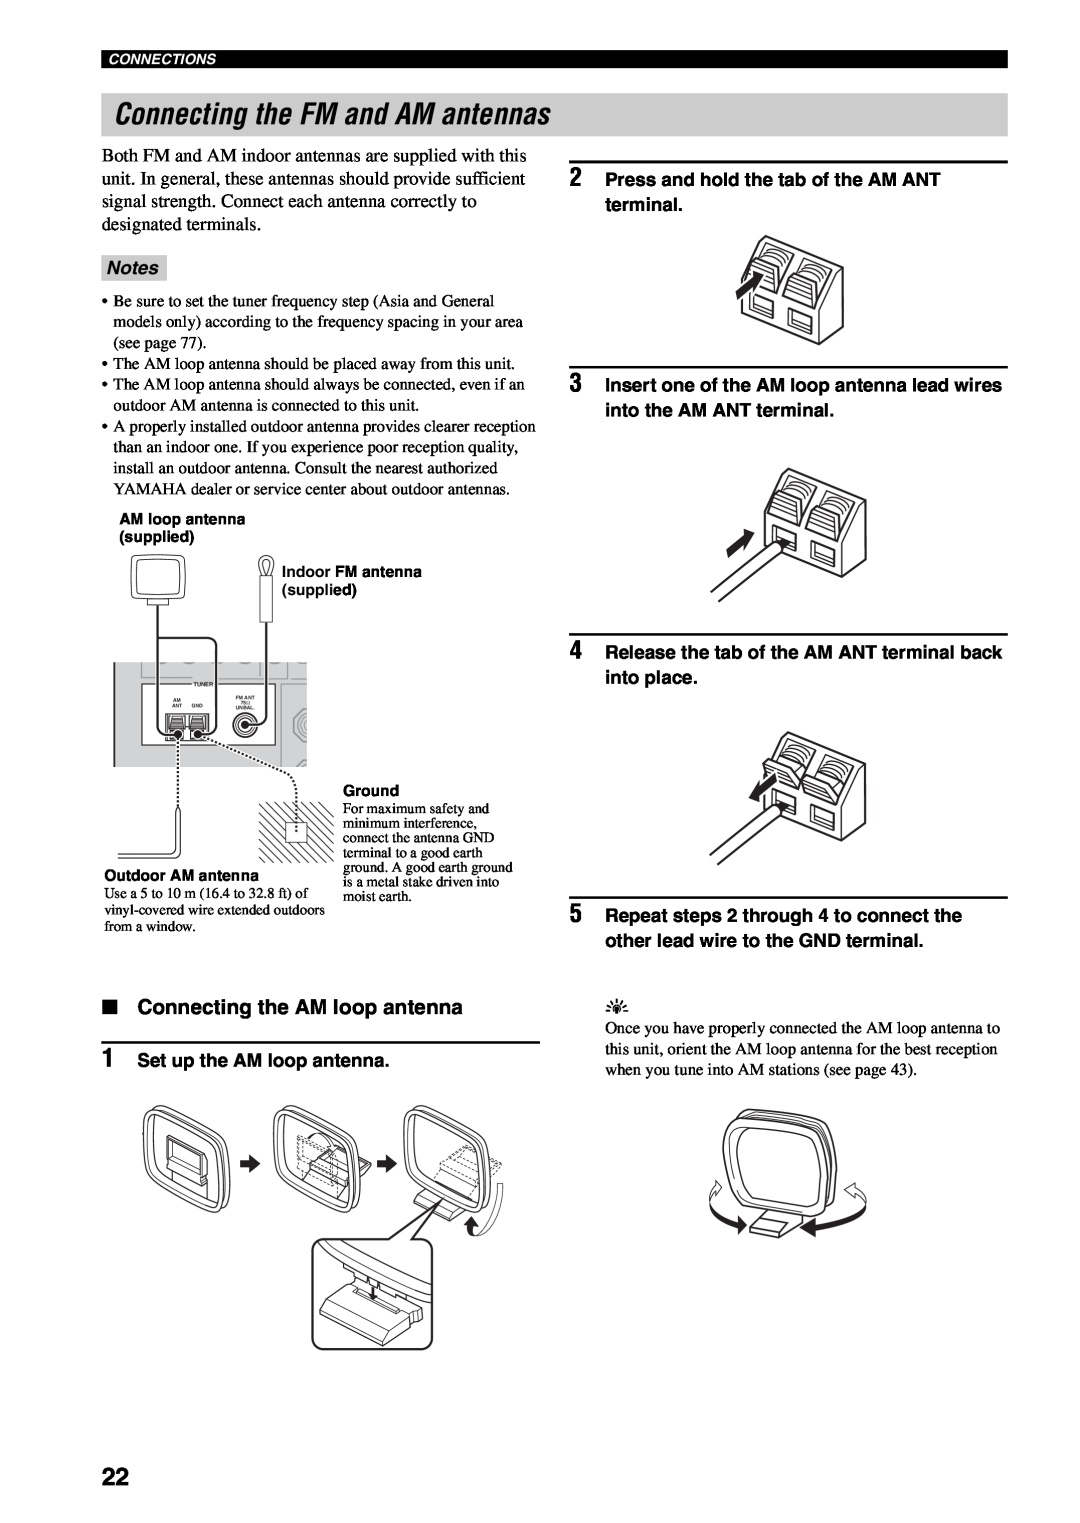 Yamaha RX-V459 owner manual Connecting the FM and AM antennas, Connecting the AM loop antenna, Notes 